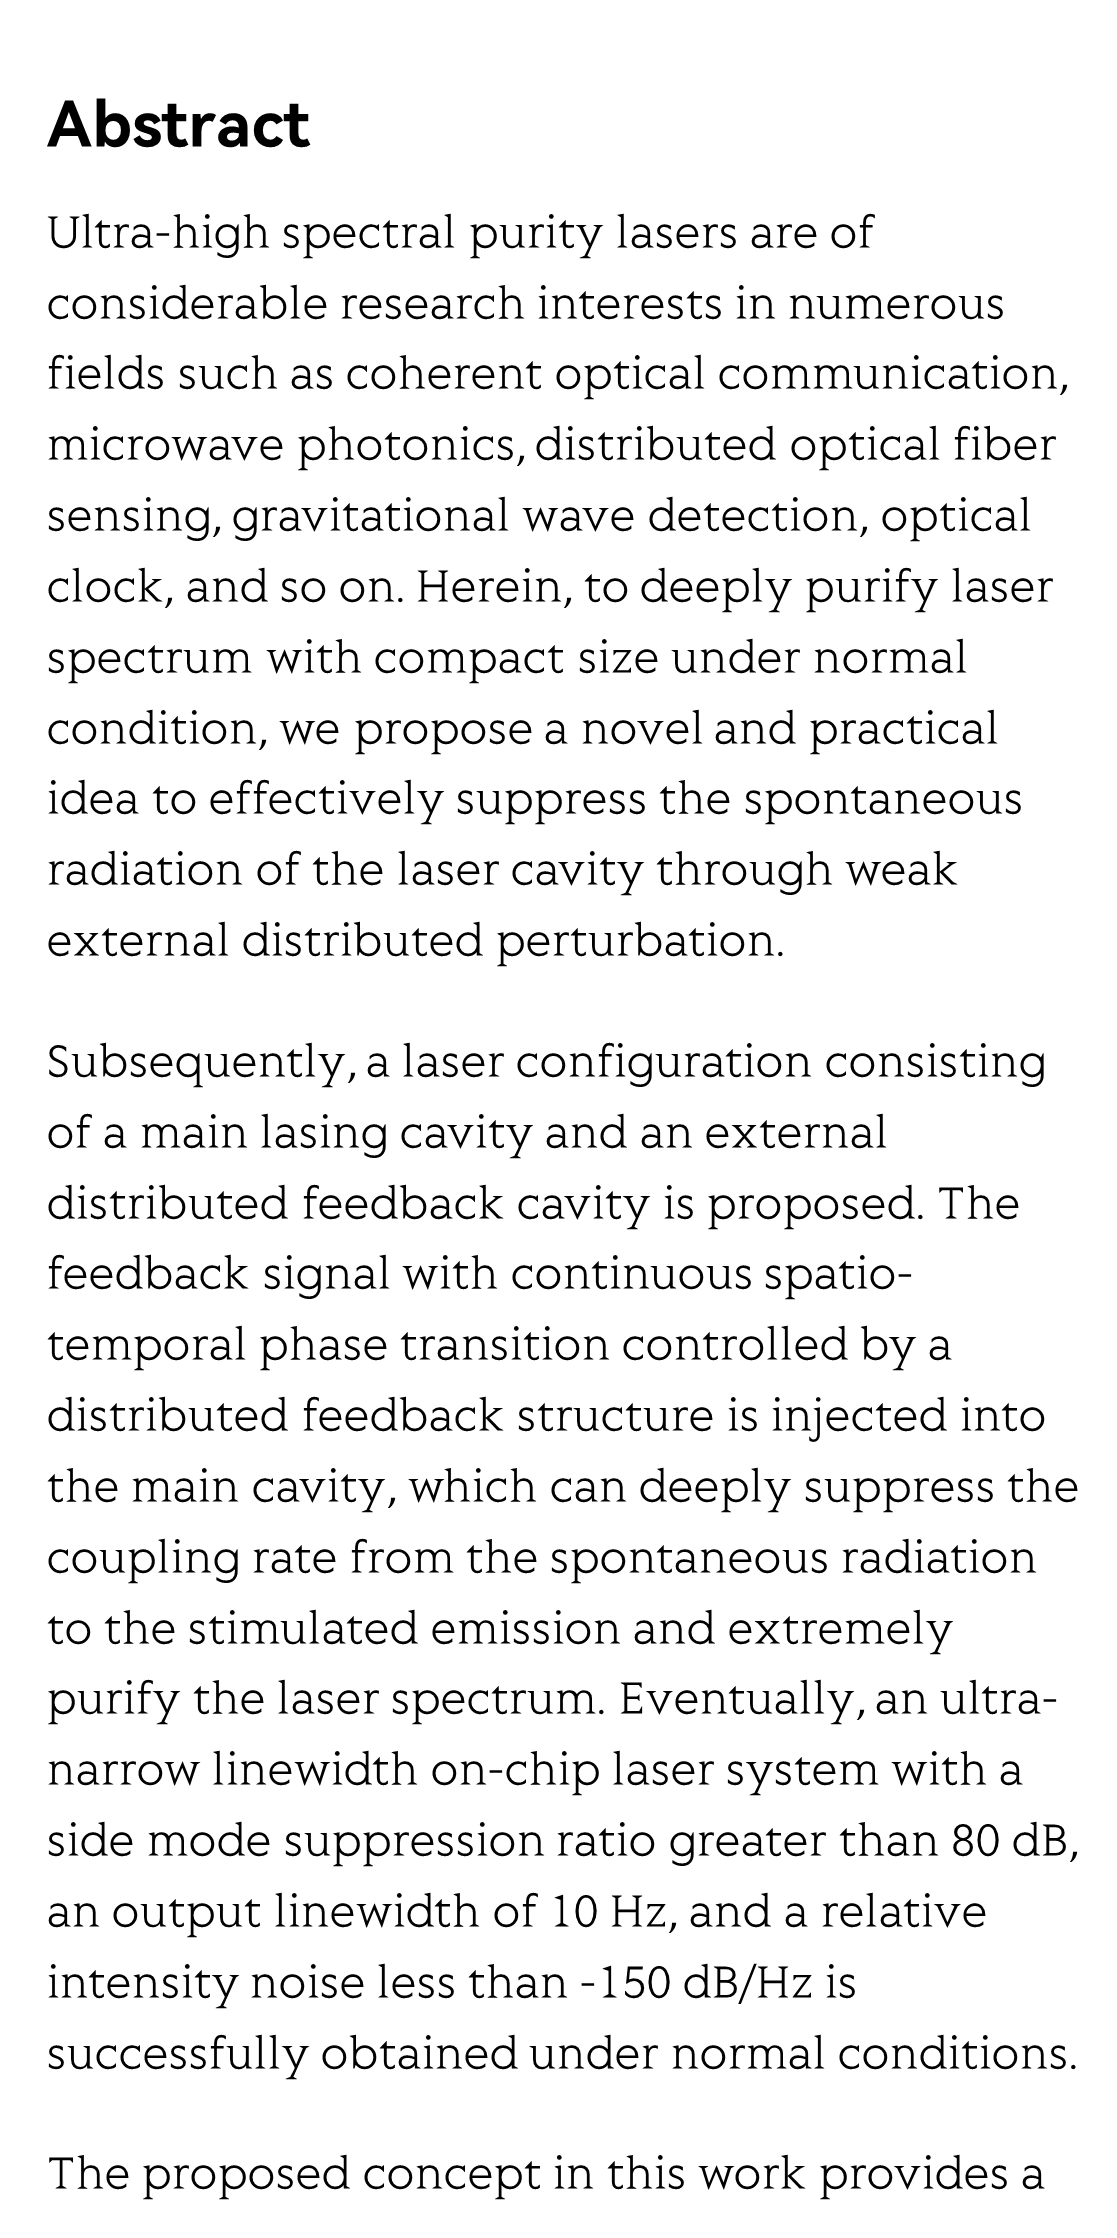 Ultra-high spectral purity laser derived from weak external distributed perturbation_2